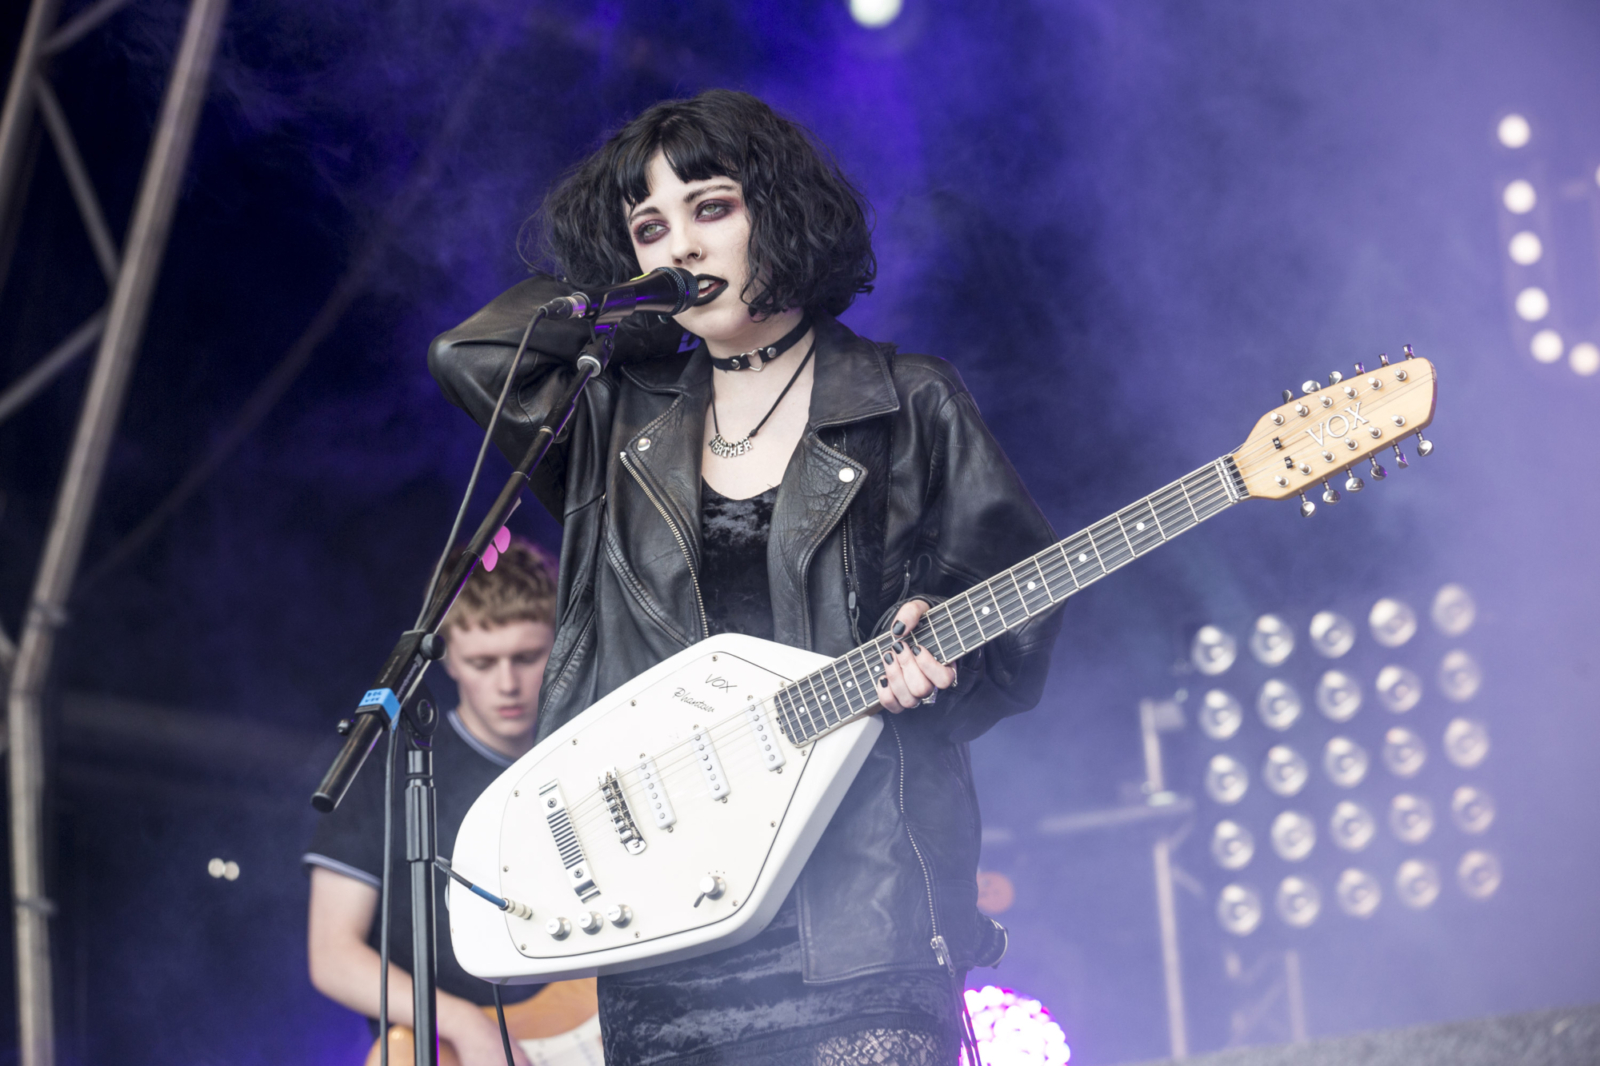 Sälen, Pale Waves & more get added to Eurosonic 2018's line-up